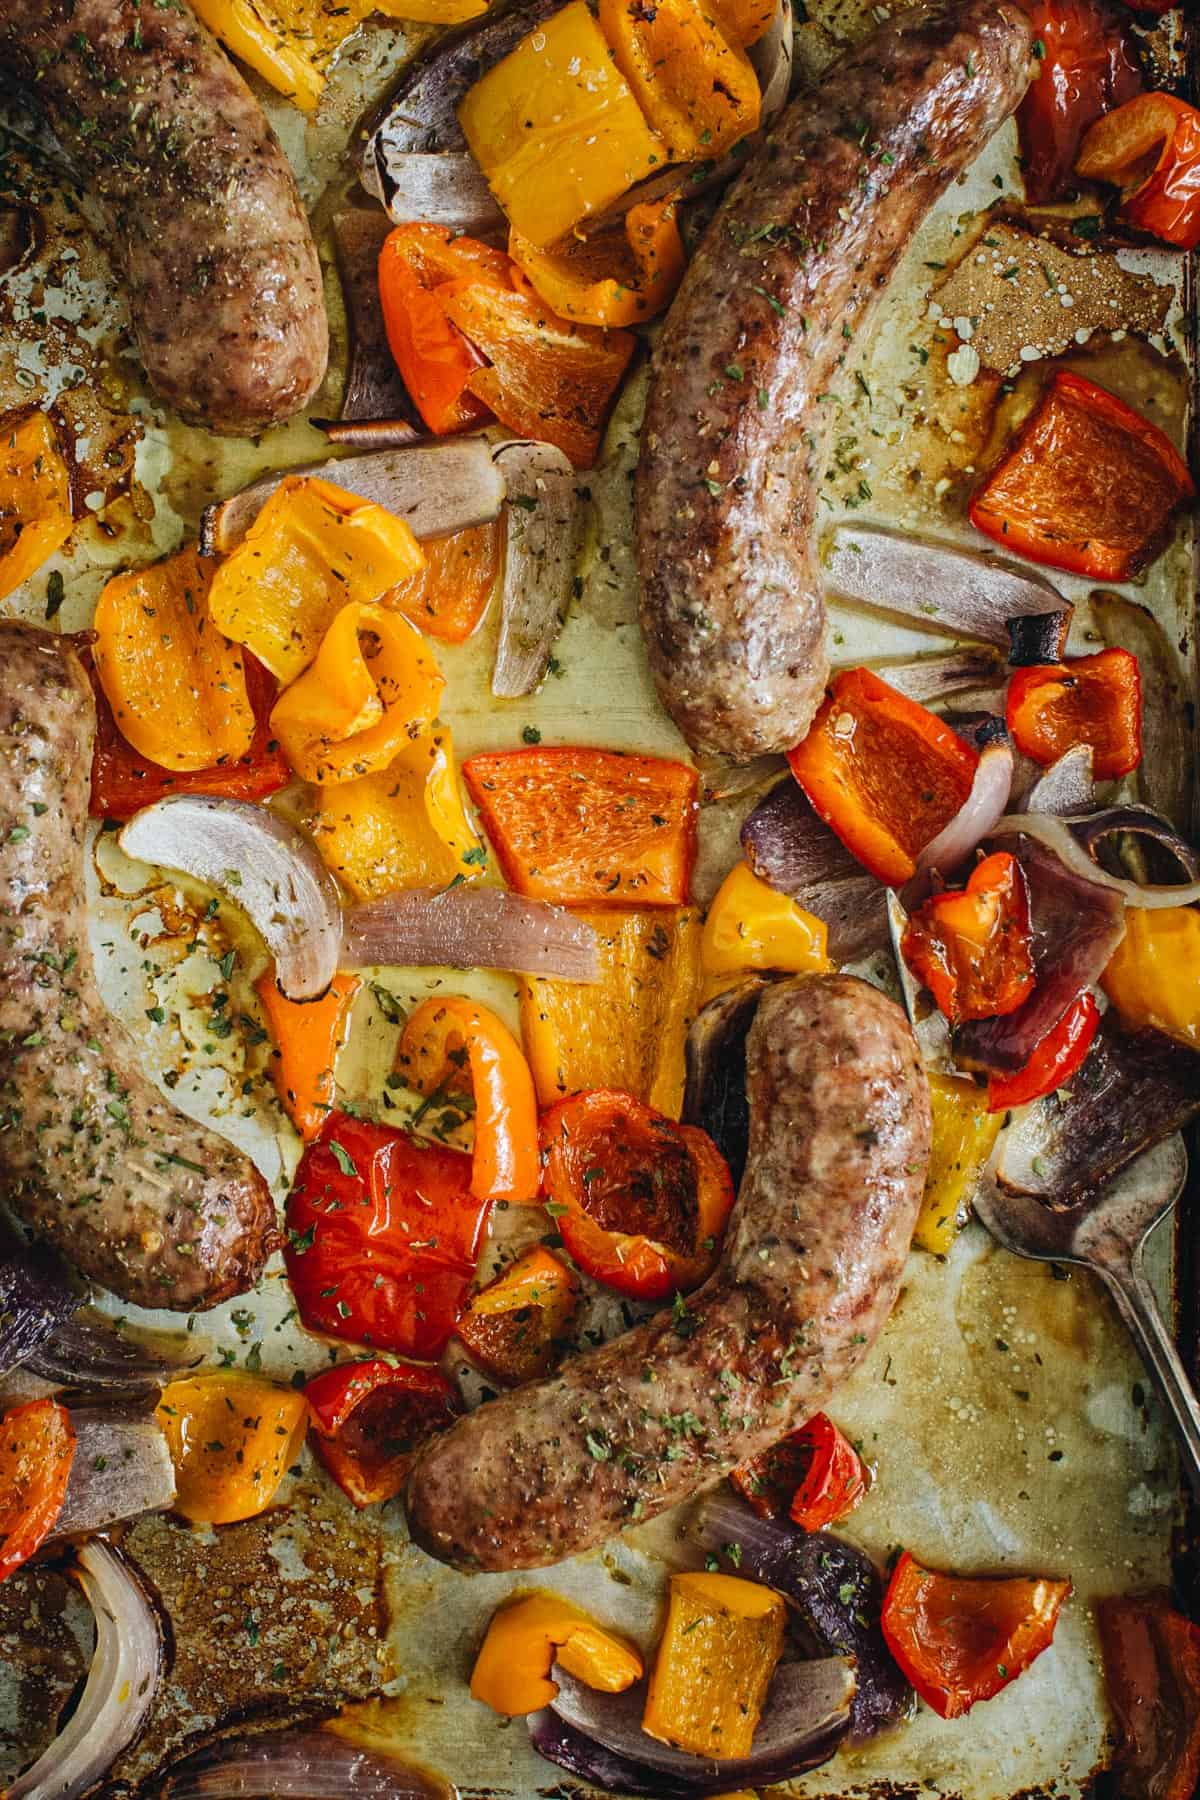 Sausage and peppers in the oven on a baking sheet.